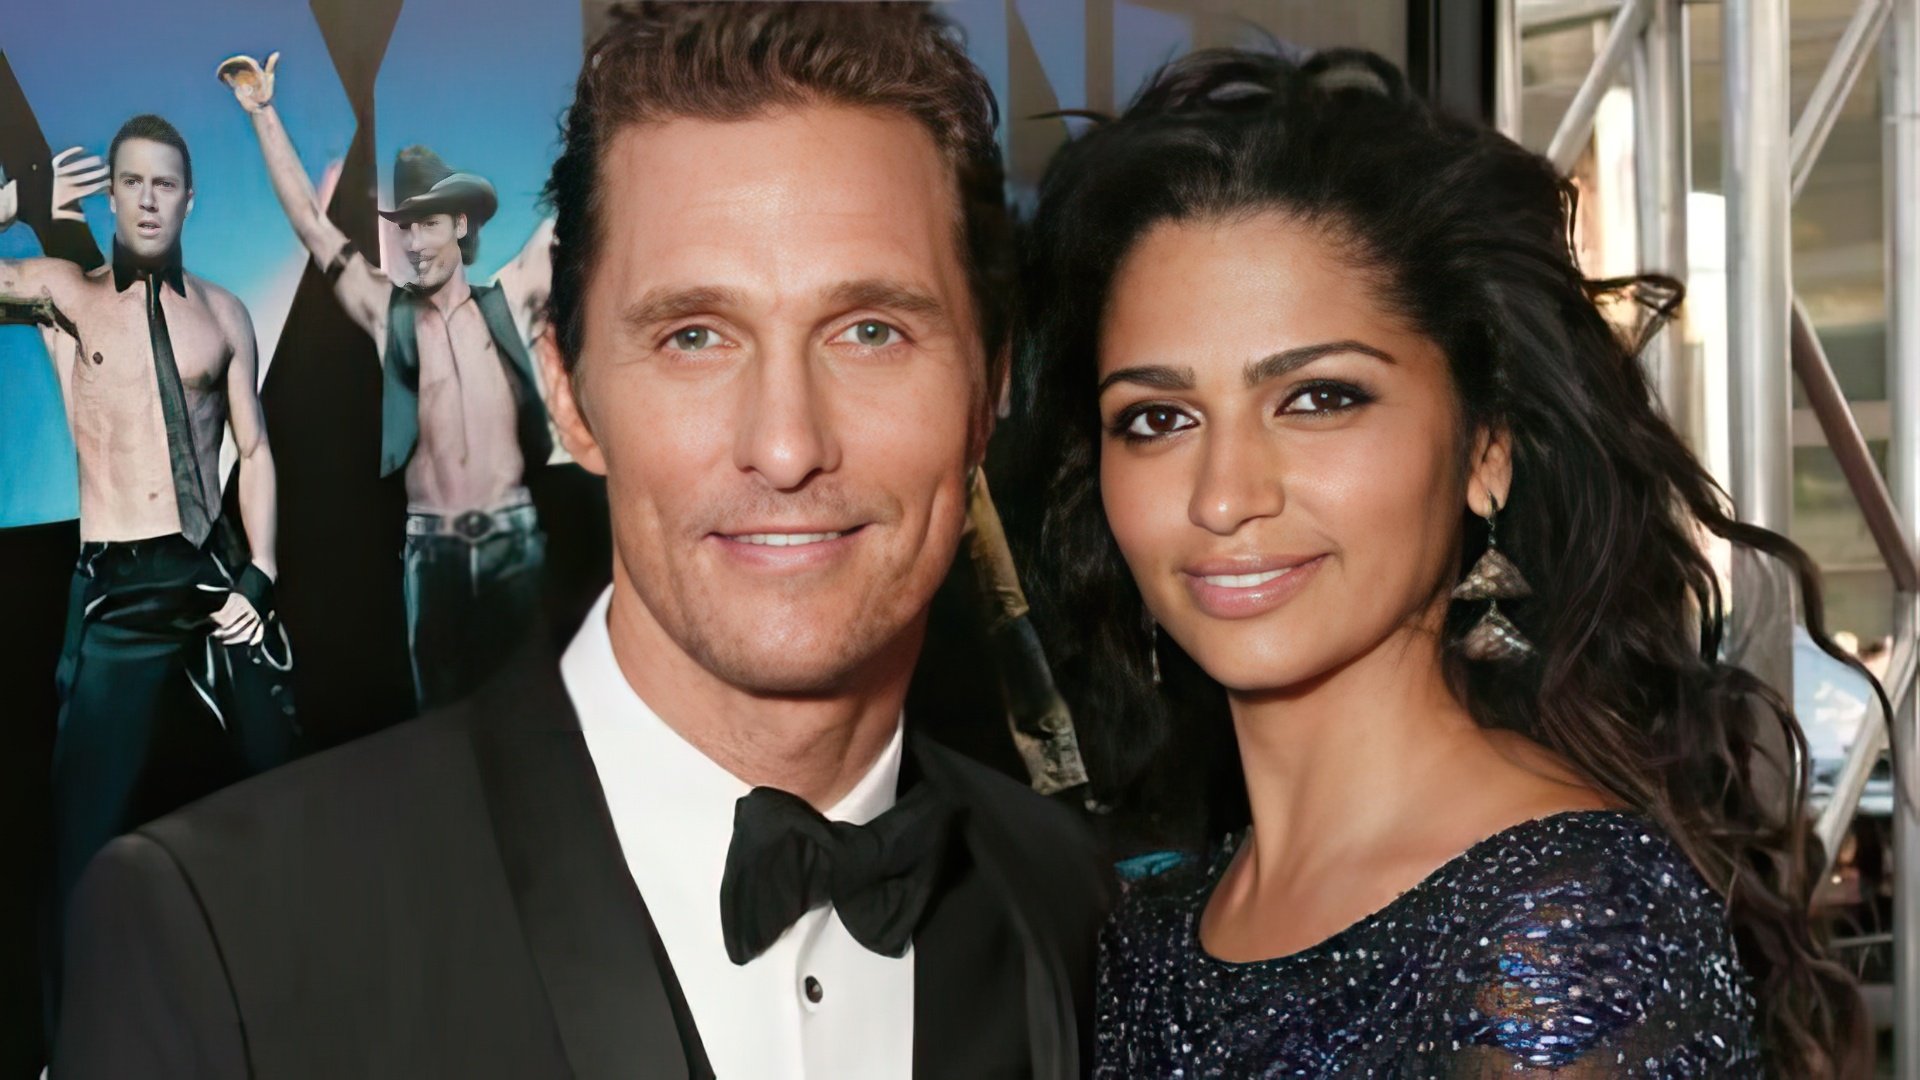 Currently McConaughey is married to Brazilian model Camila Alves